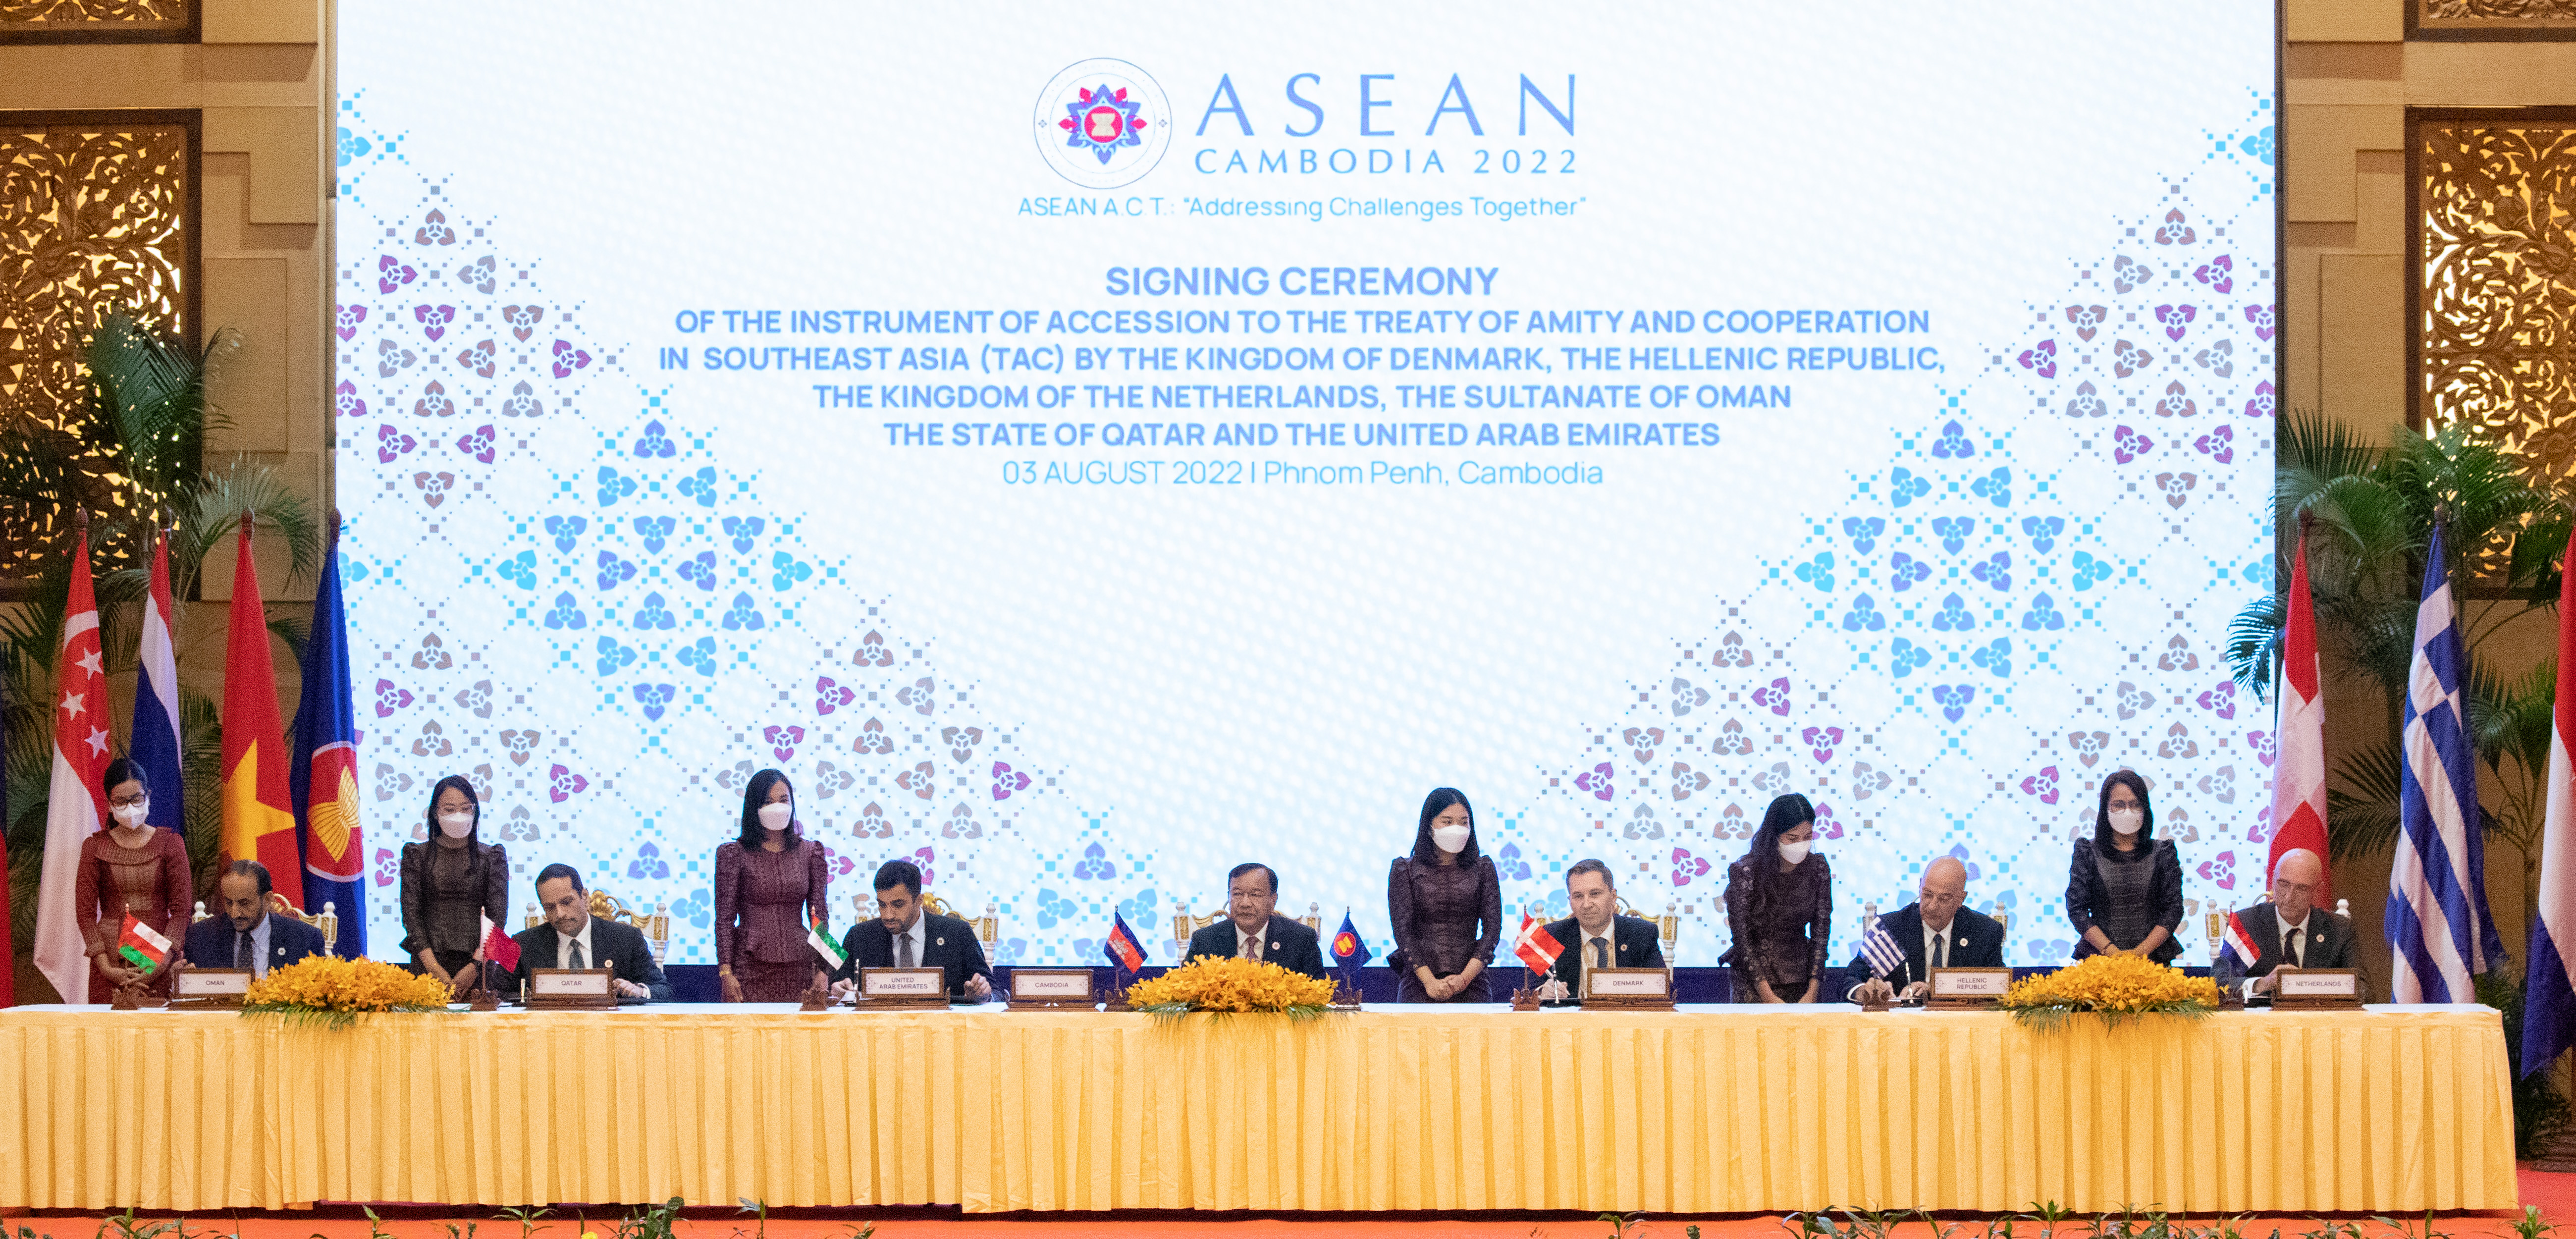 Qatar Signs Instrument of Accession to ASEAN Treaty of Amity and Cooperation